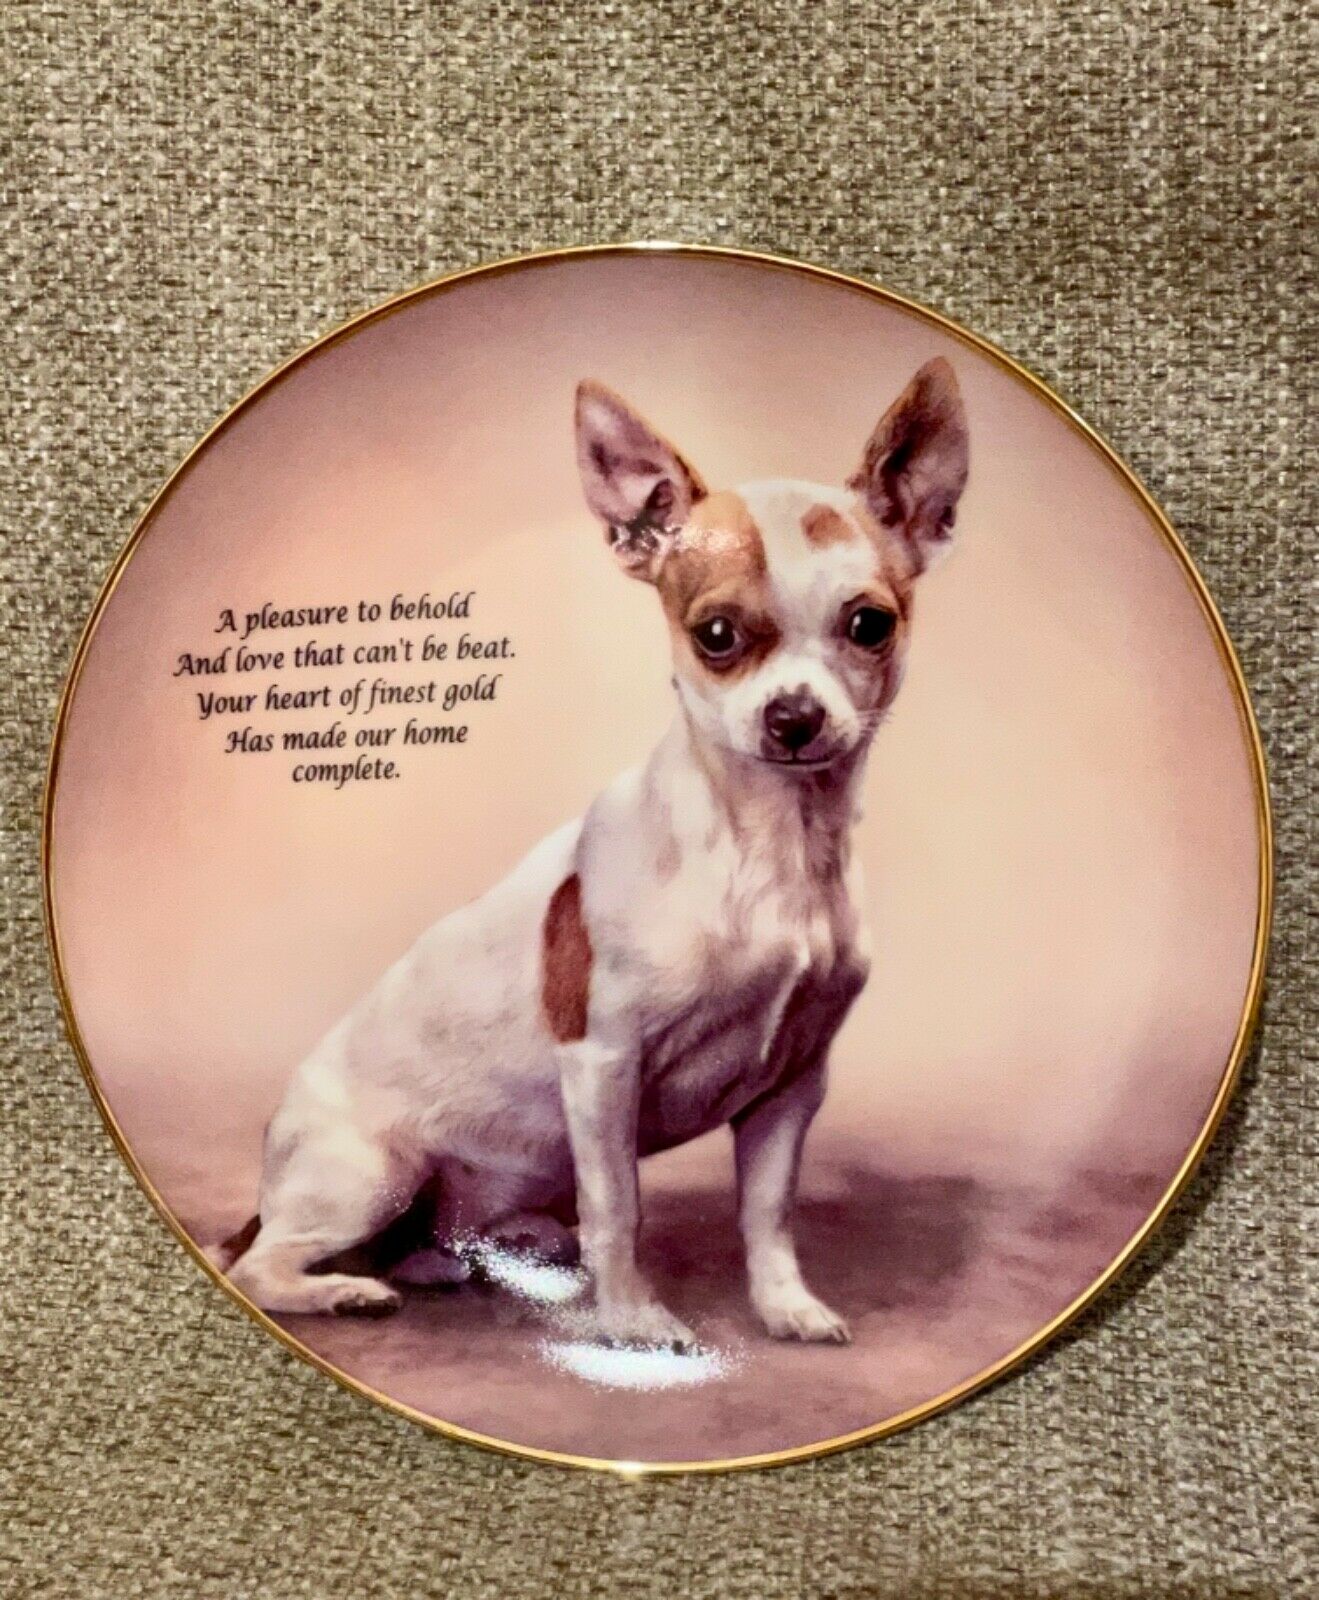 Cherished Chihuahuas Plate by The Danbury Mint 